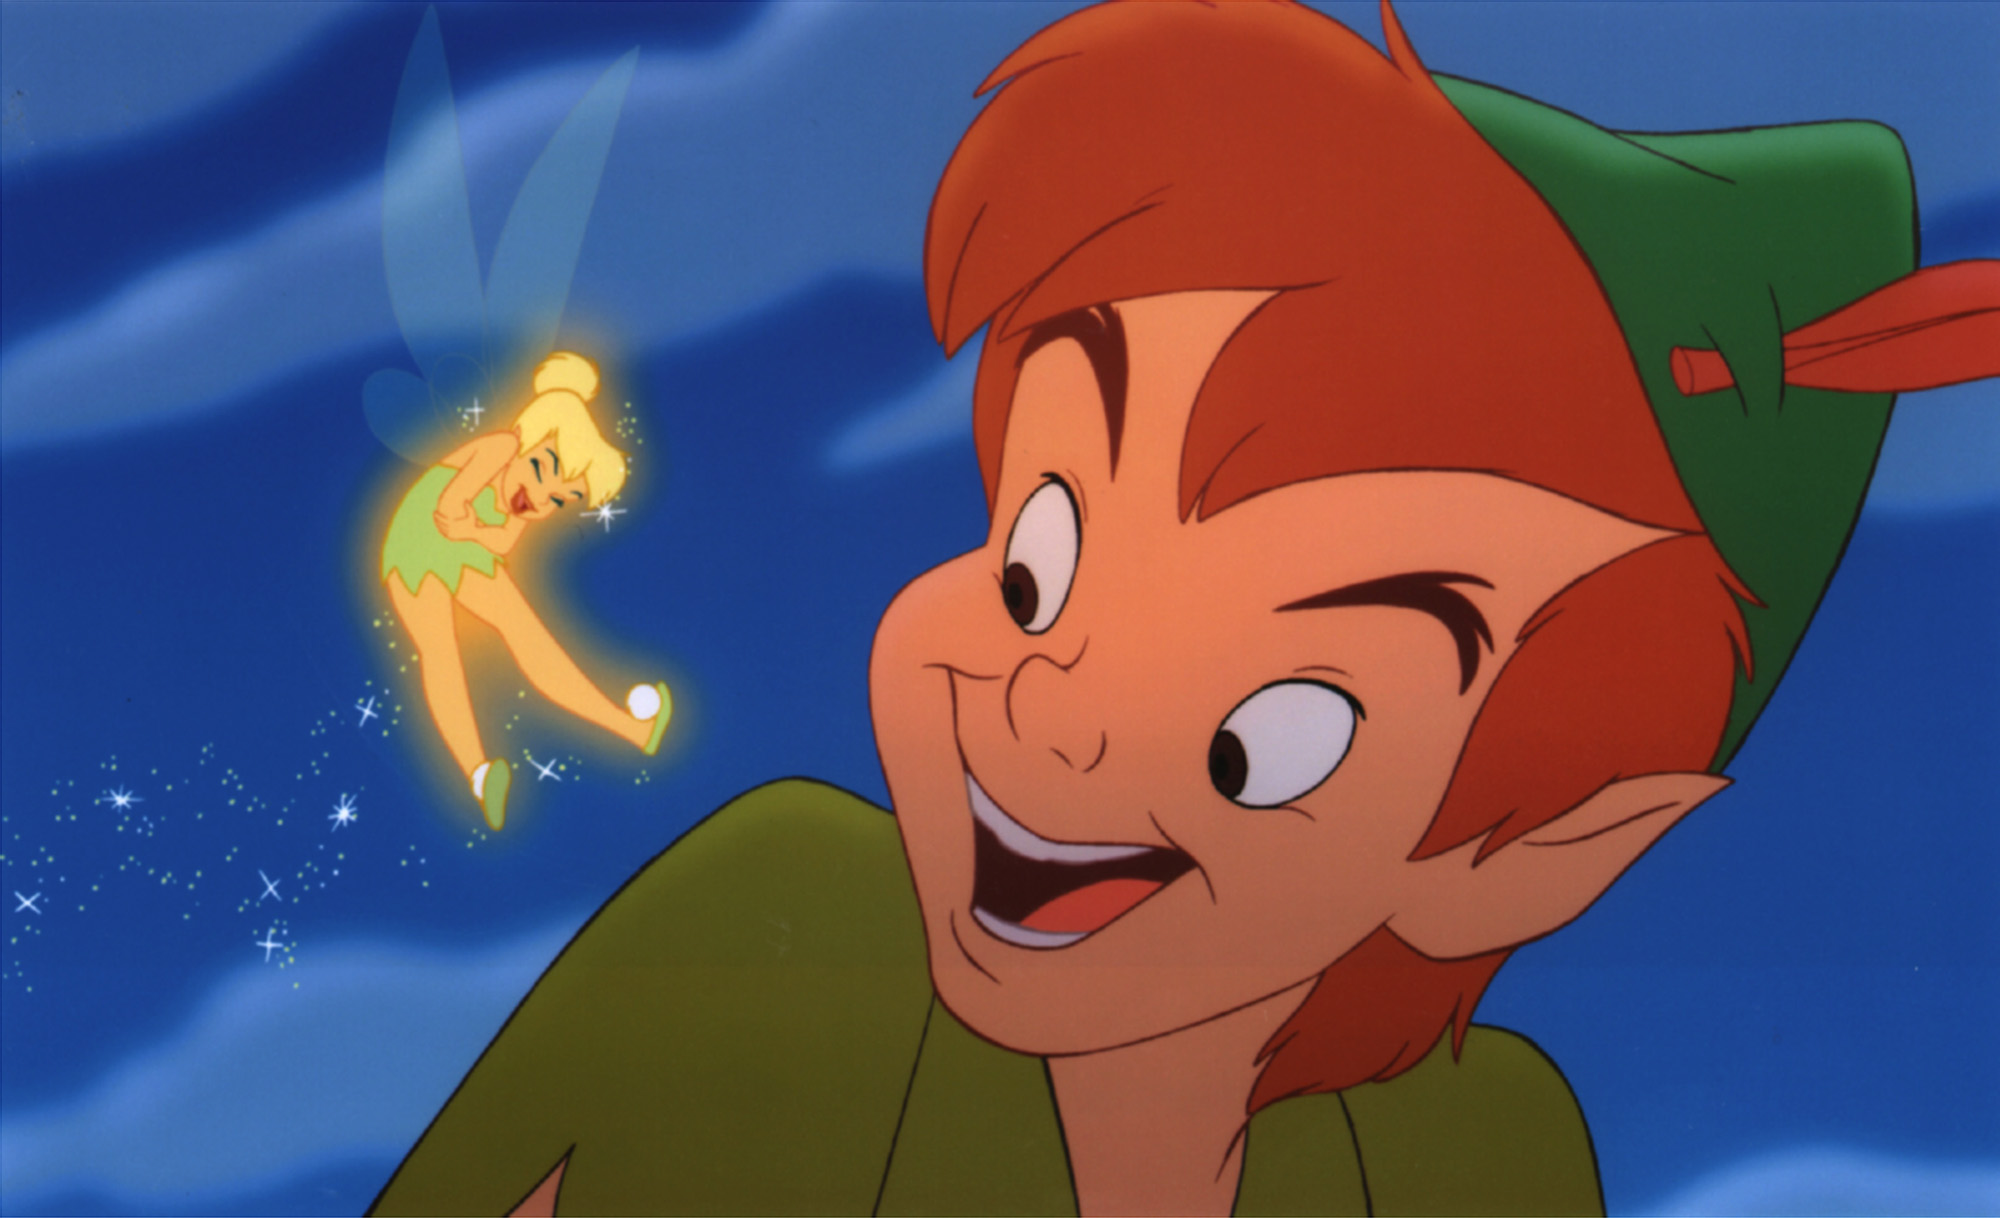 New on DVD: Disney's 'Peter Pan' is classic film for all ages